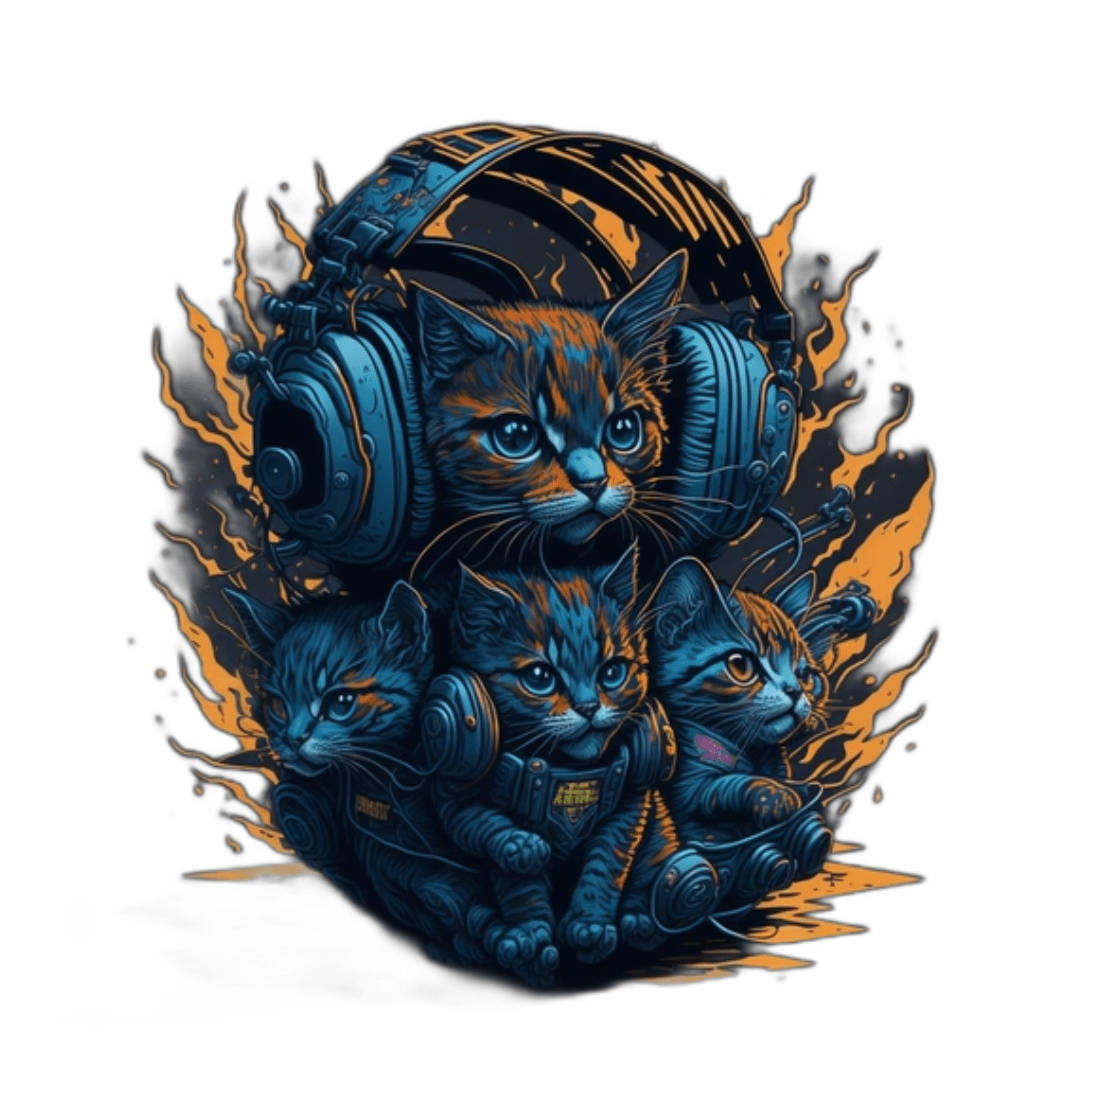 Cats wearing headphones playing TNT design preview image.